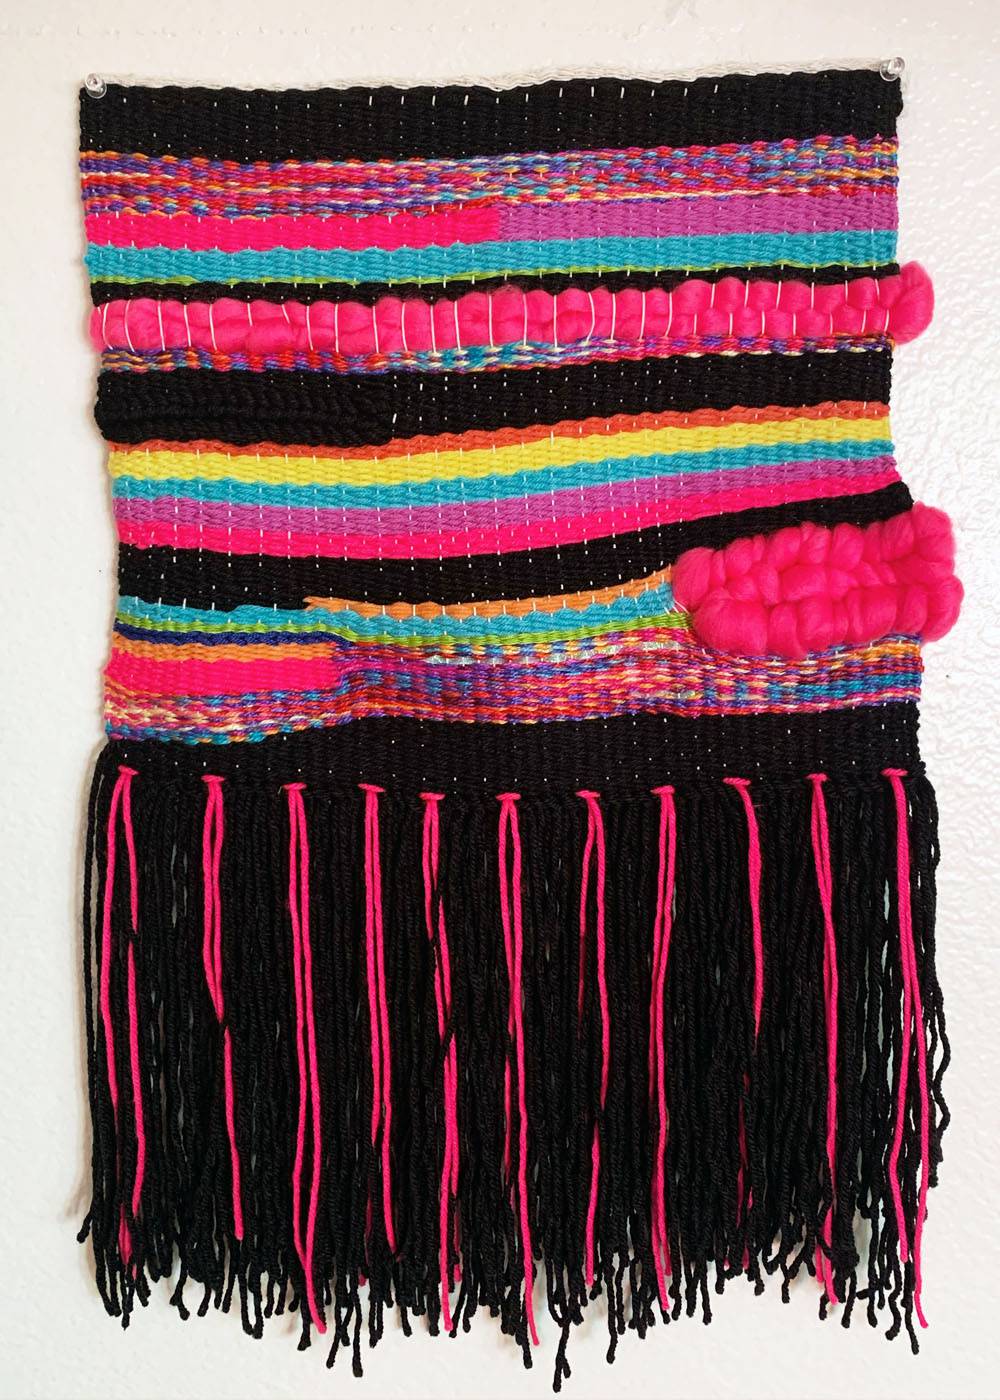 As part of my deliverables for my Senior Studio project, I created a weaving. This weaving was made on a loom with a variety of yarns, fibers, and ribbon. The final weaving is a tactile representation of my Mexican and American cultures and traditions being woven together to represent making connections. Weaving loom yarn design Mexican American 